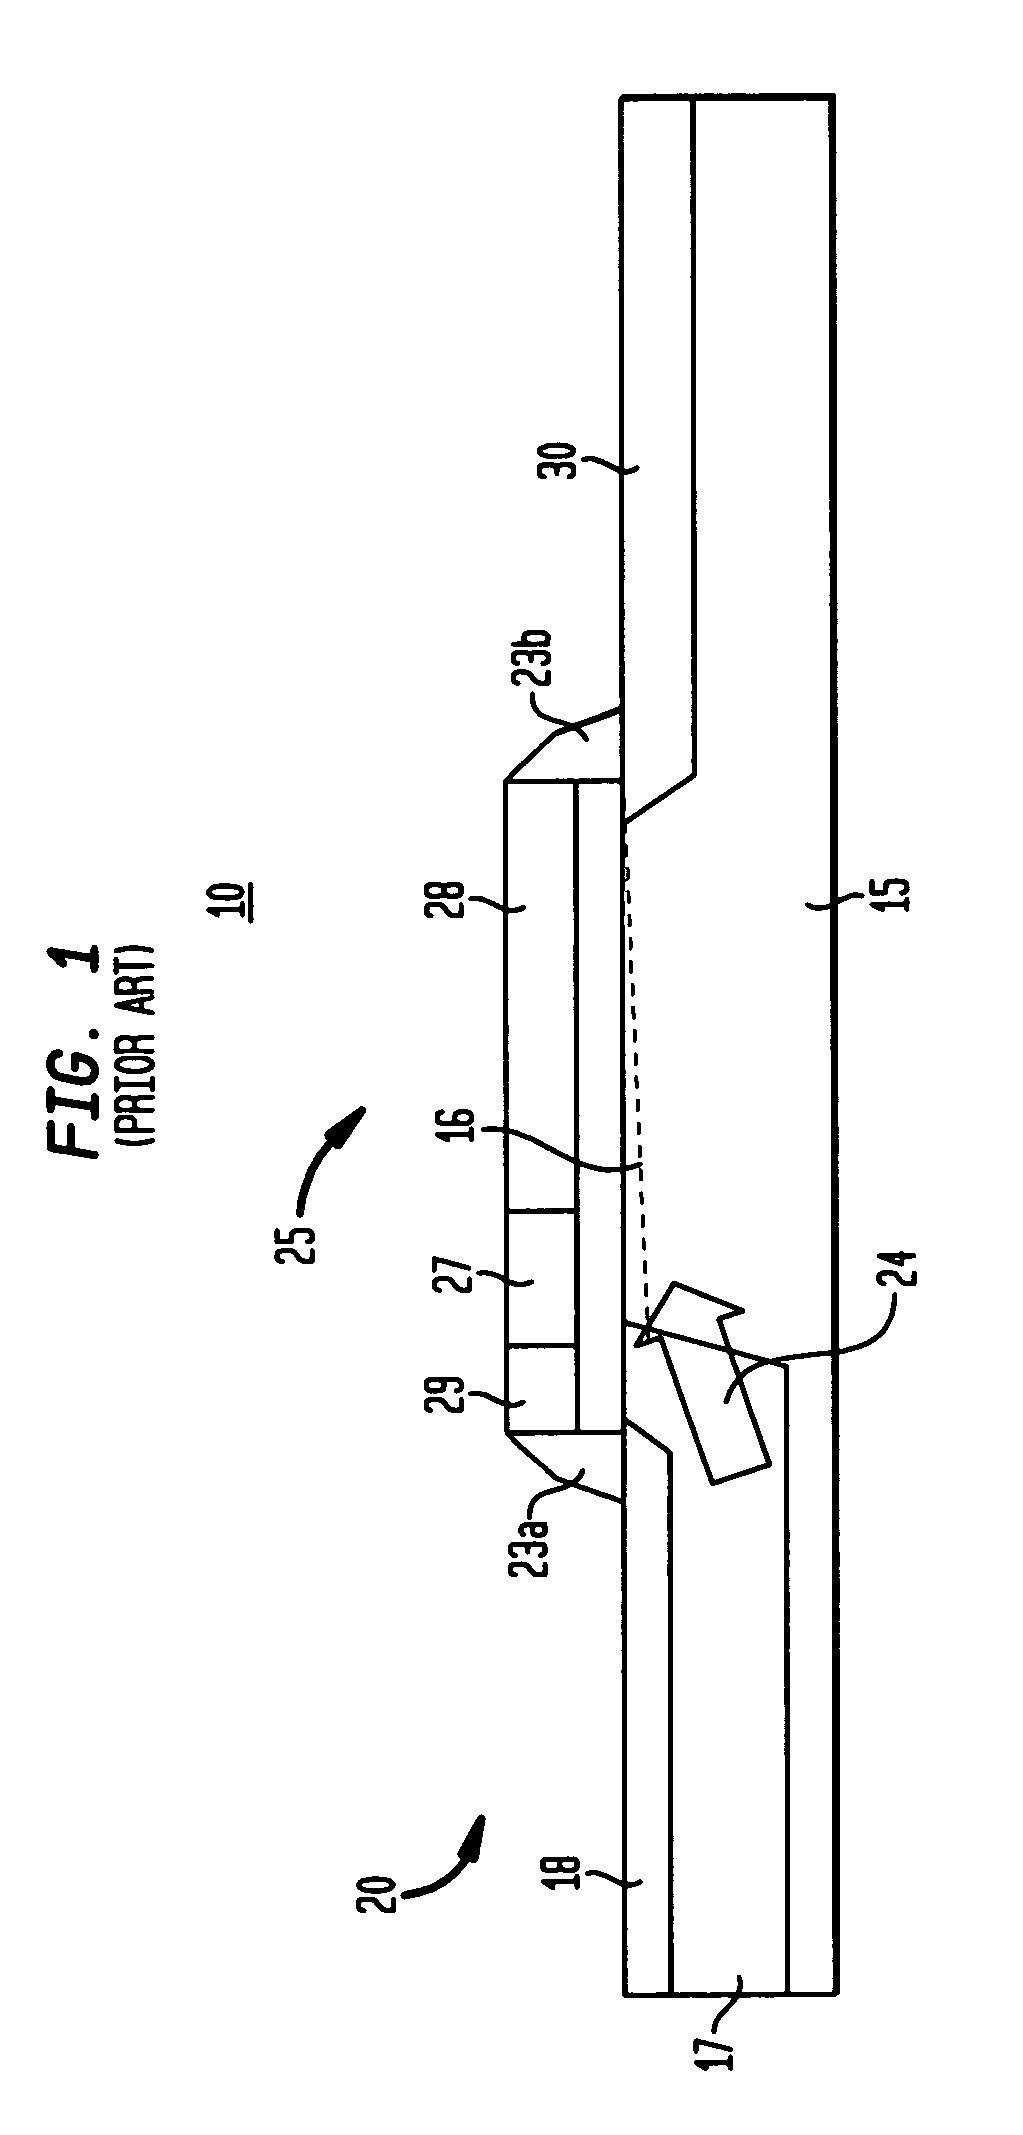 Recessed gate for an image sensor